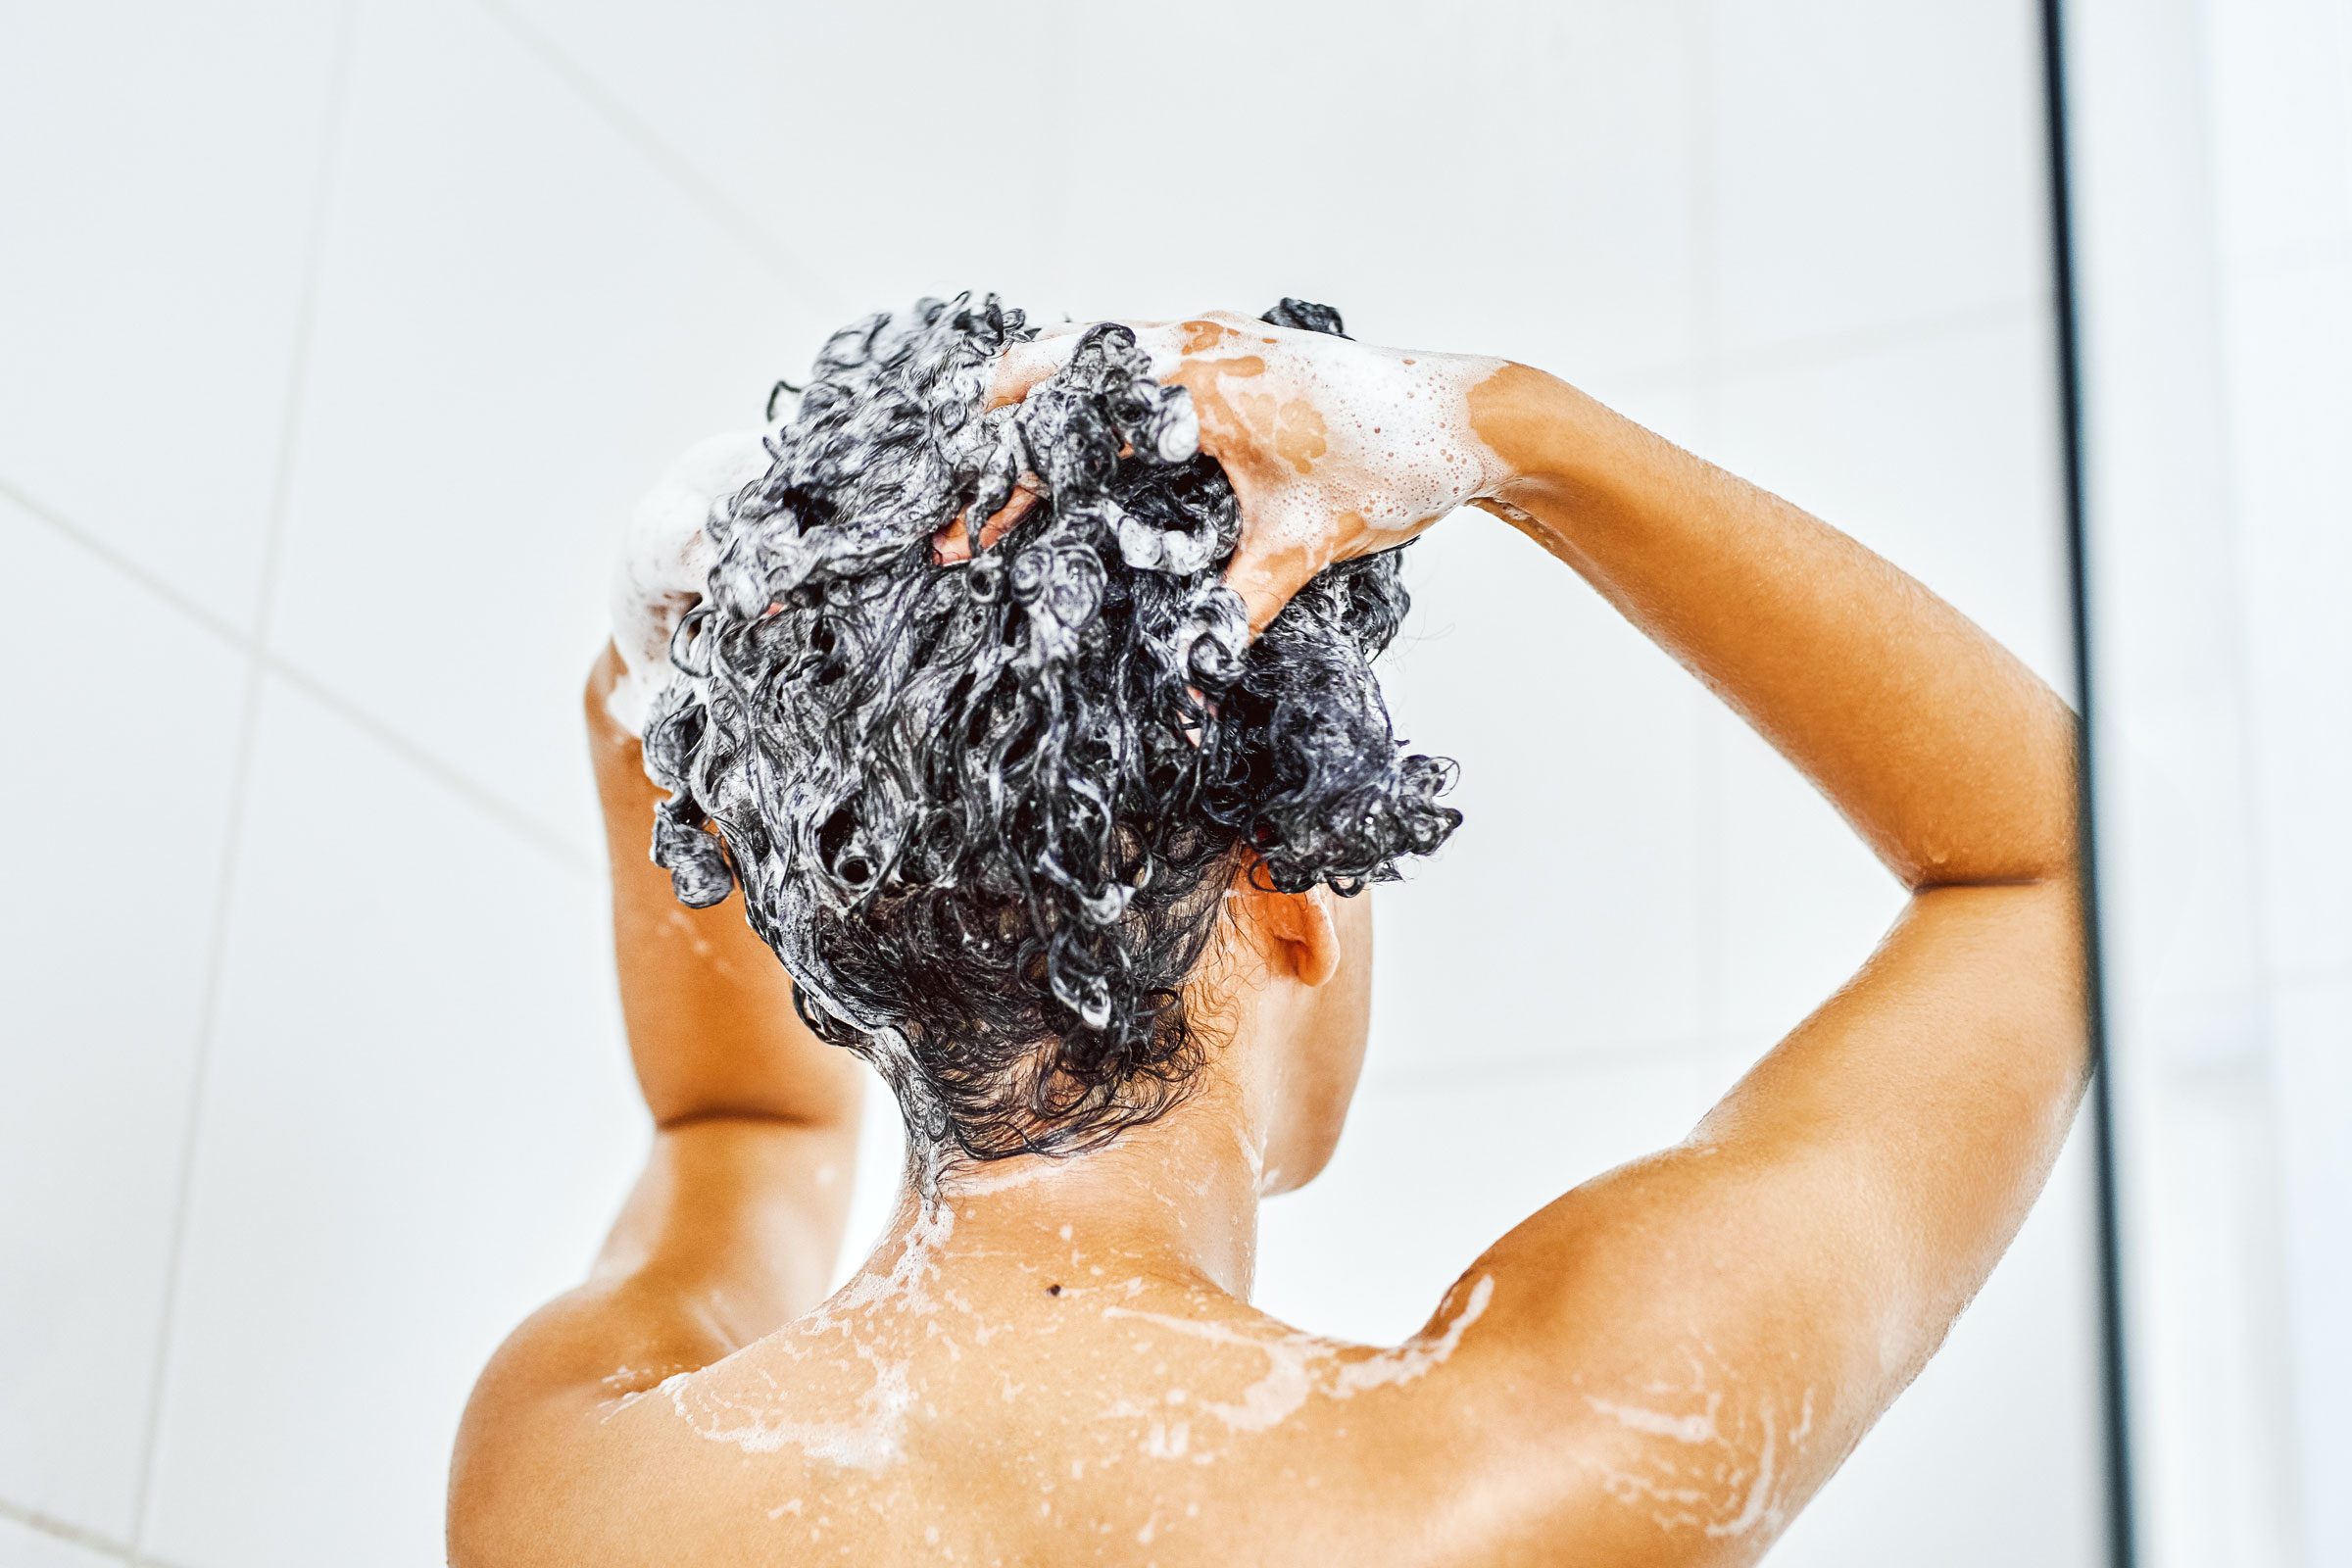 How Often Should You Wash Your Hair? Expert Tips for Every Hair Type